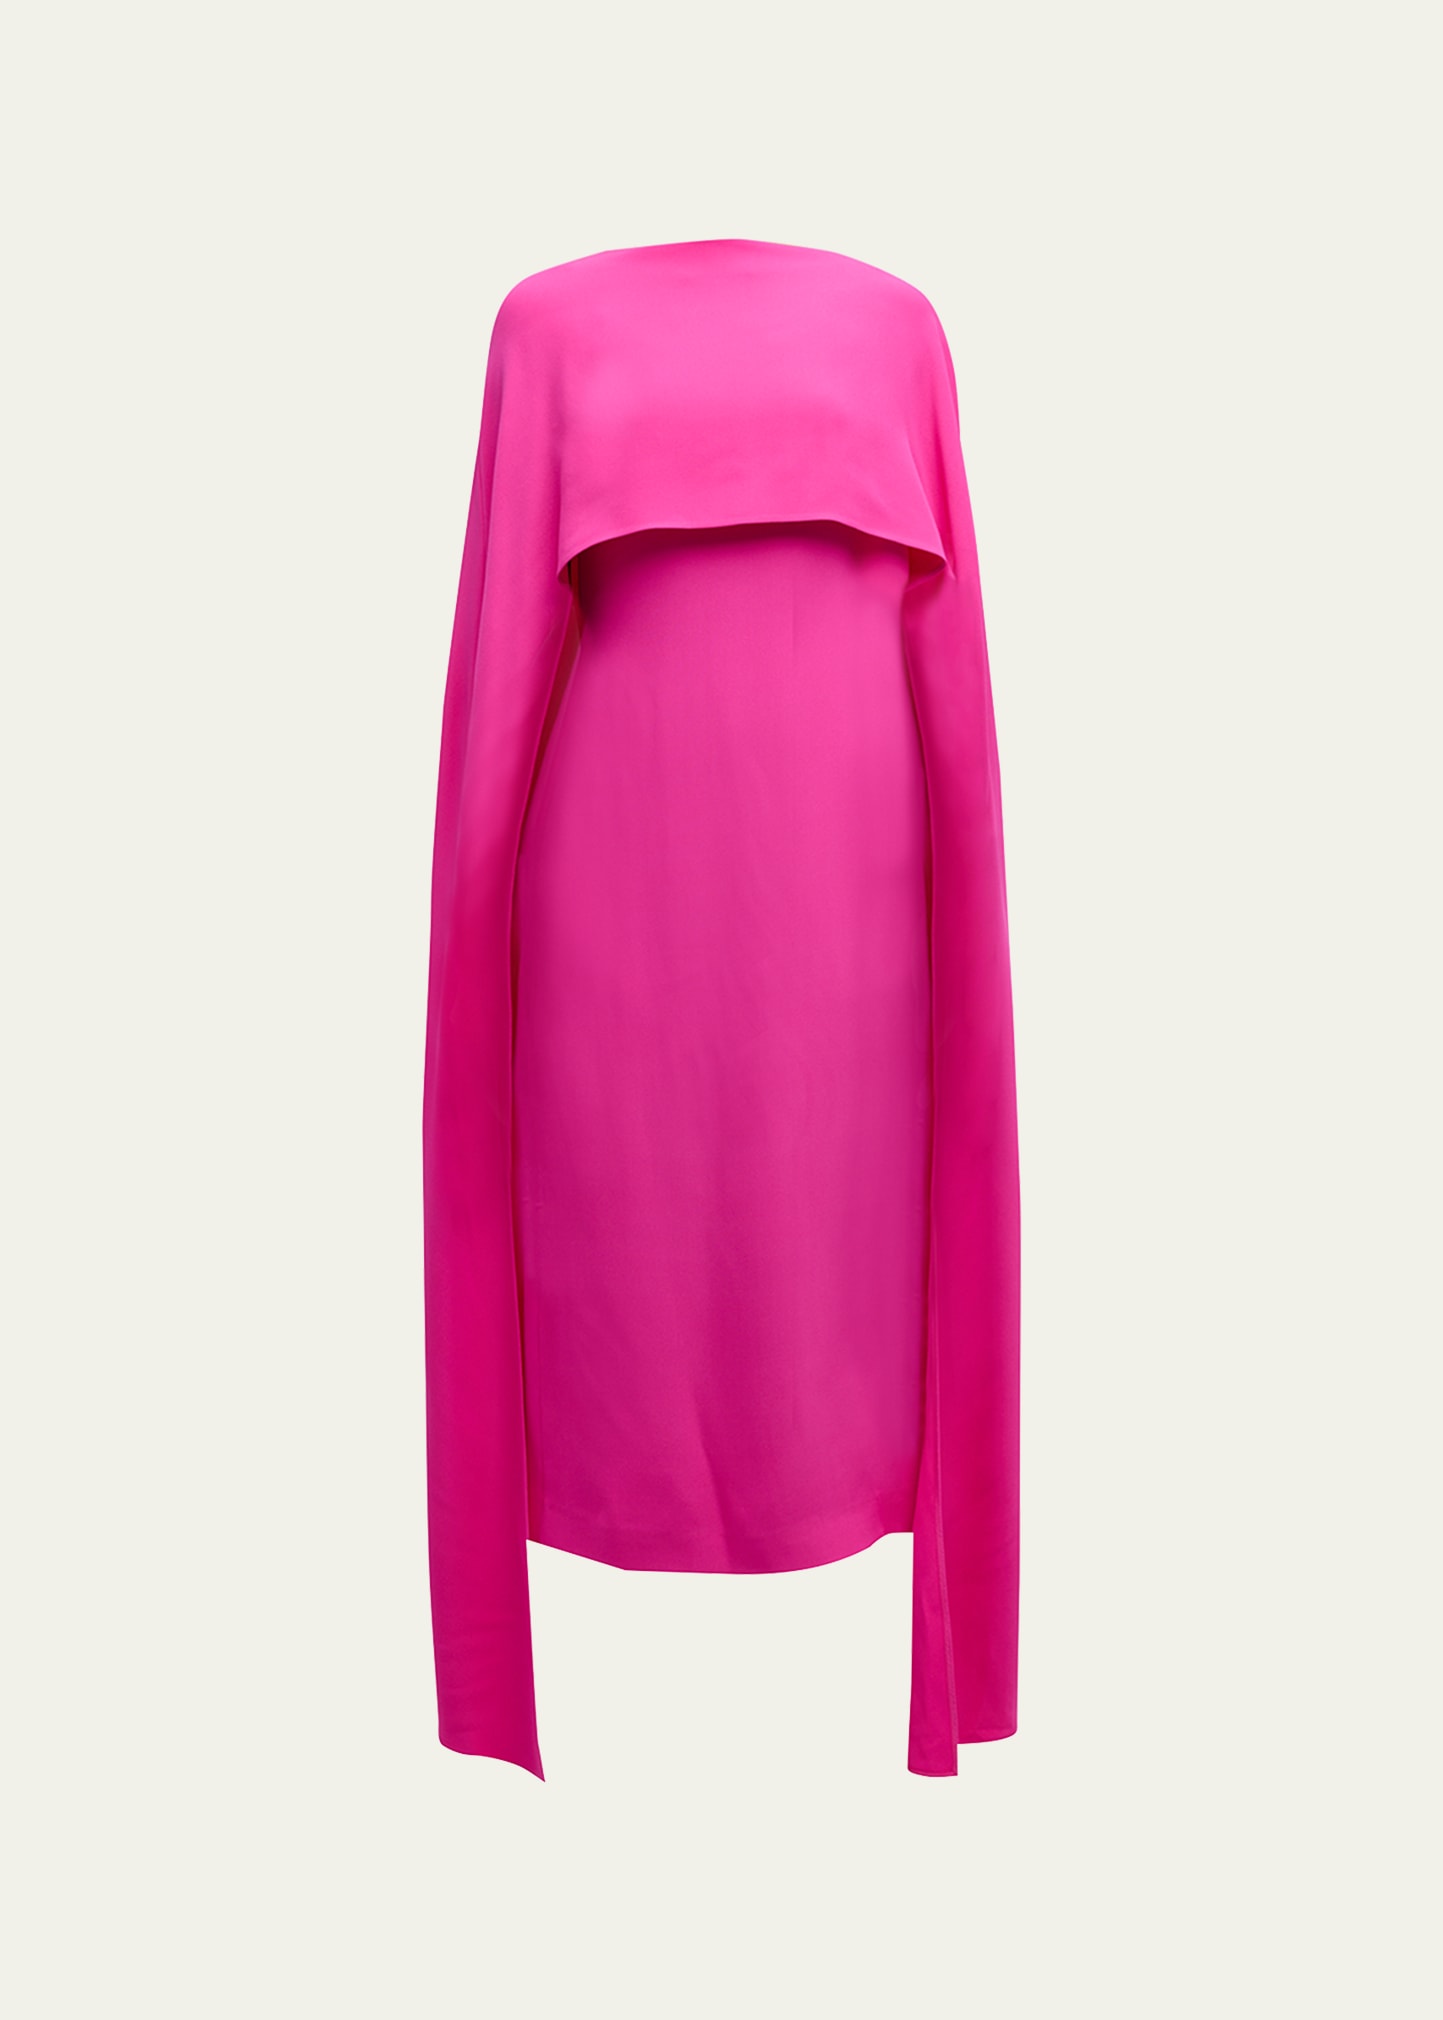 Shop Valentino Cady Couture Sheath Dress With Cape Sleeves In Pink